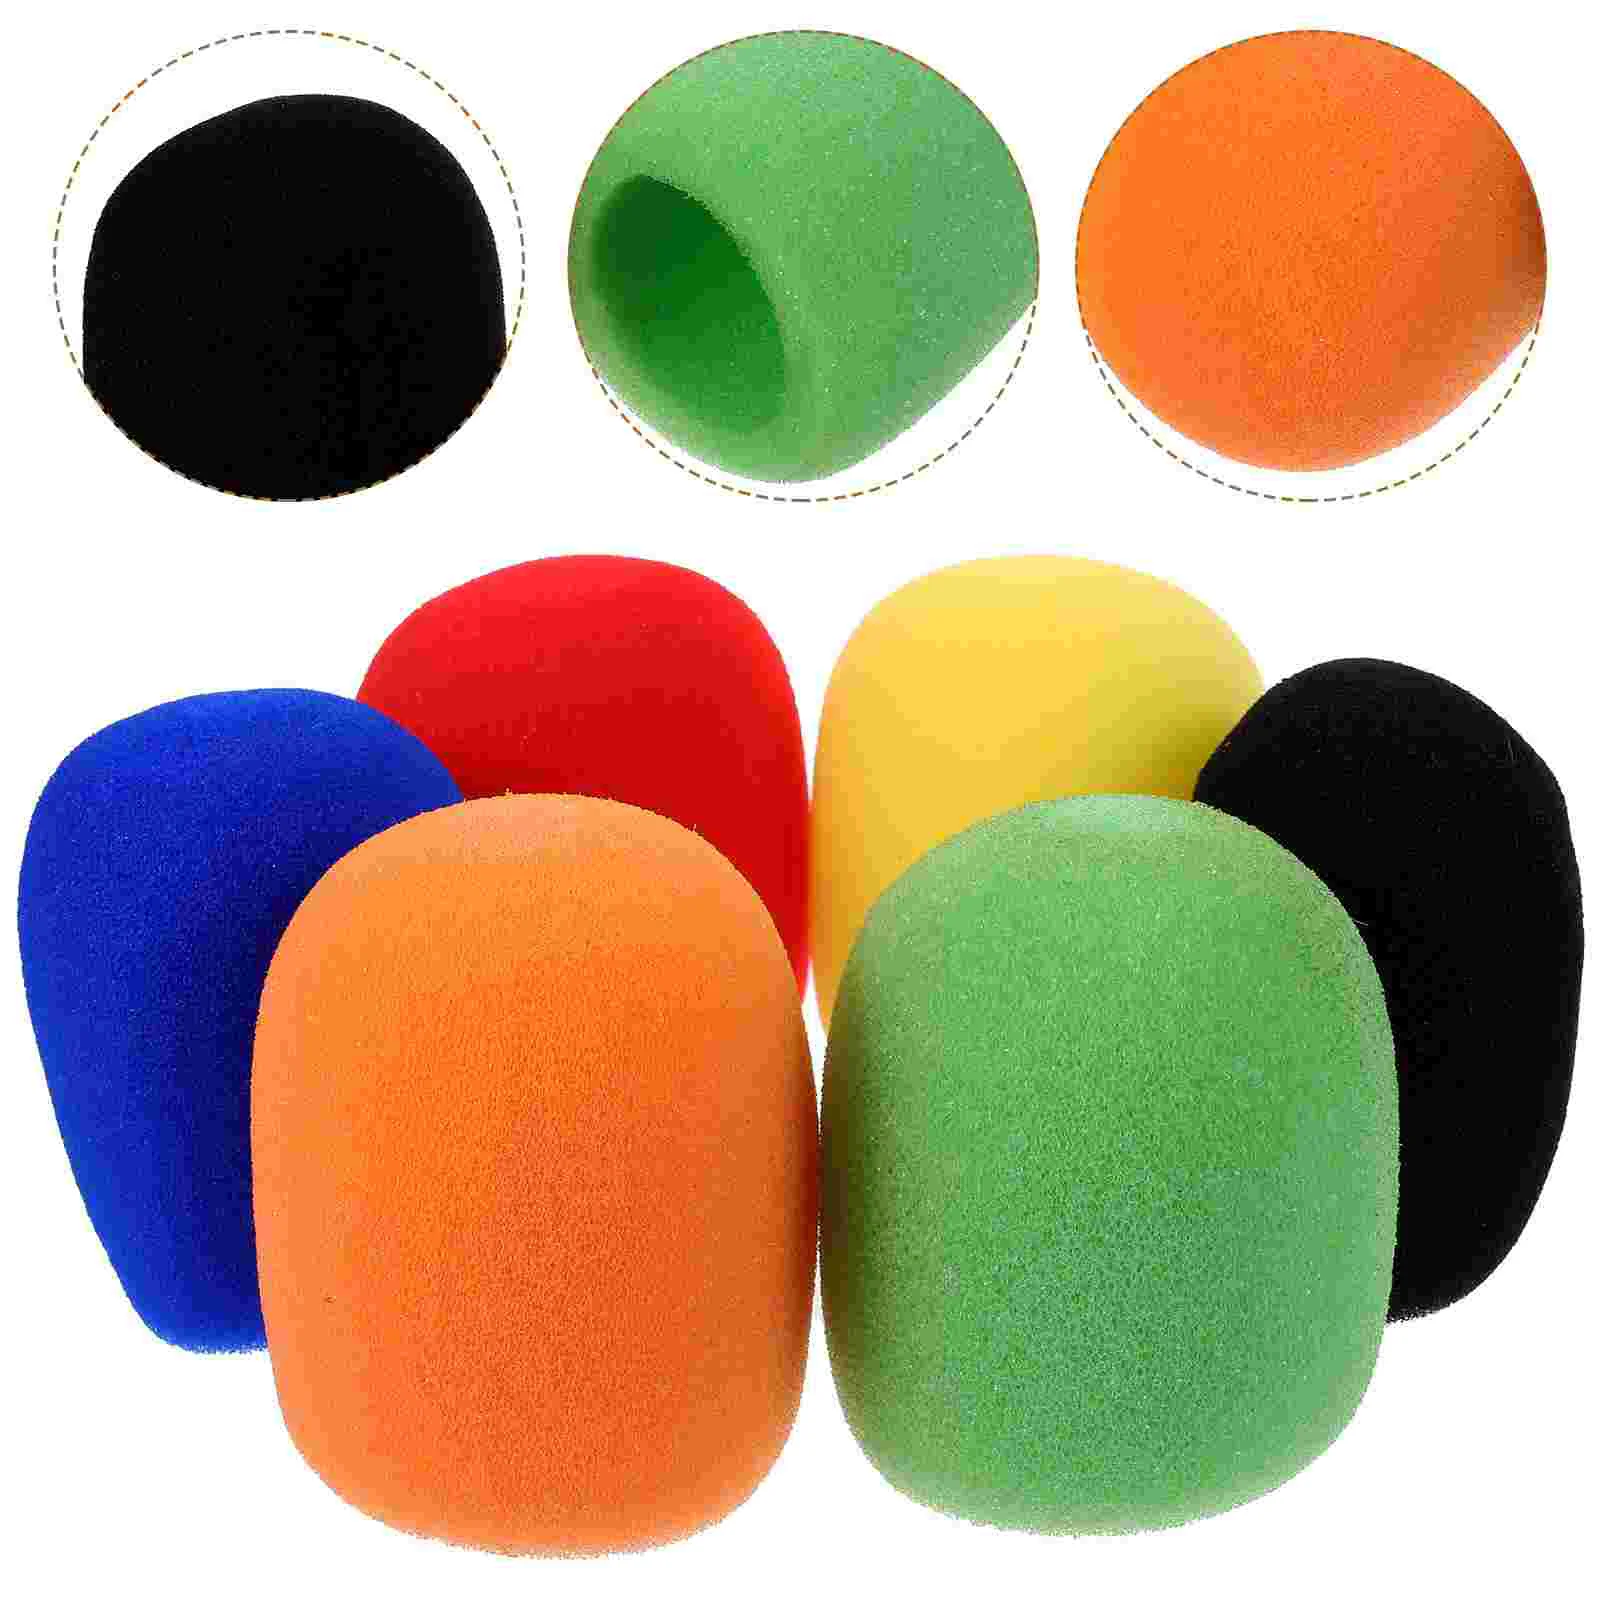 

6 Pcs Mic Microphone Case Windscreen Anti-fall Stage Sponge Cover Sponges Covers Handheld